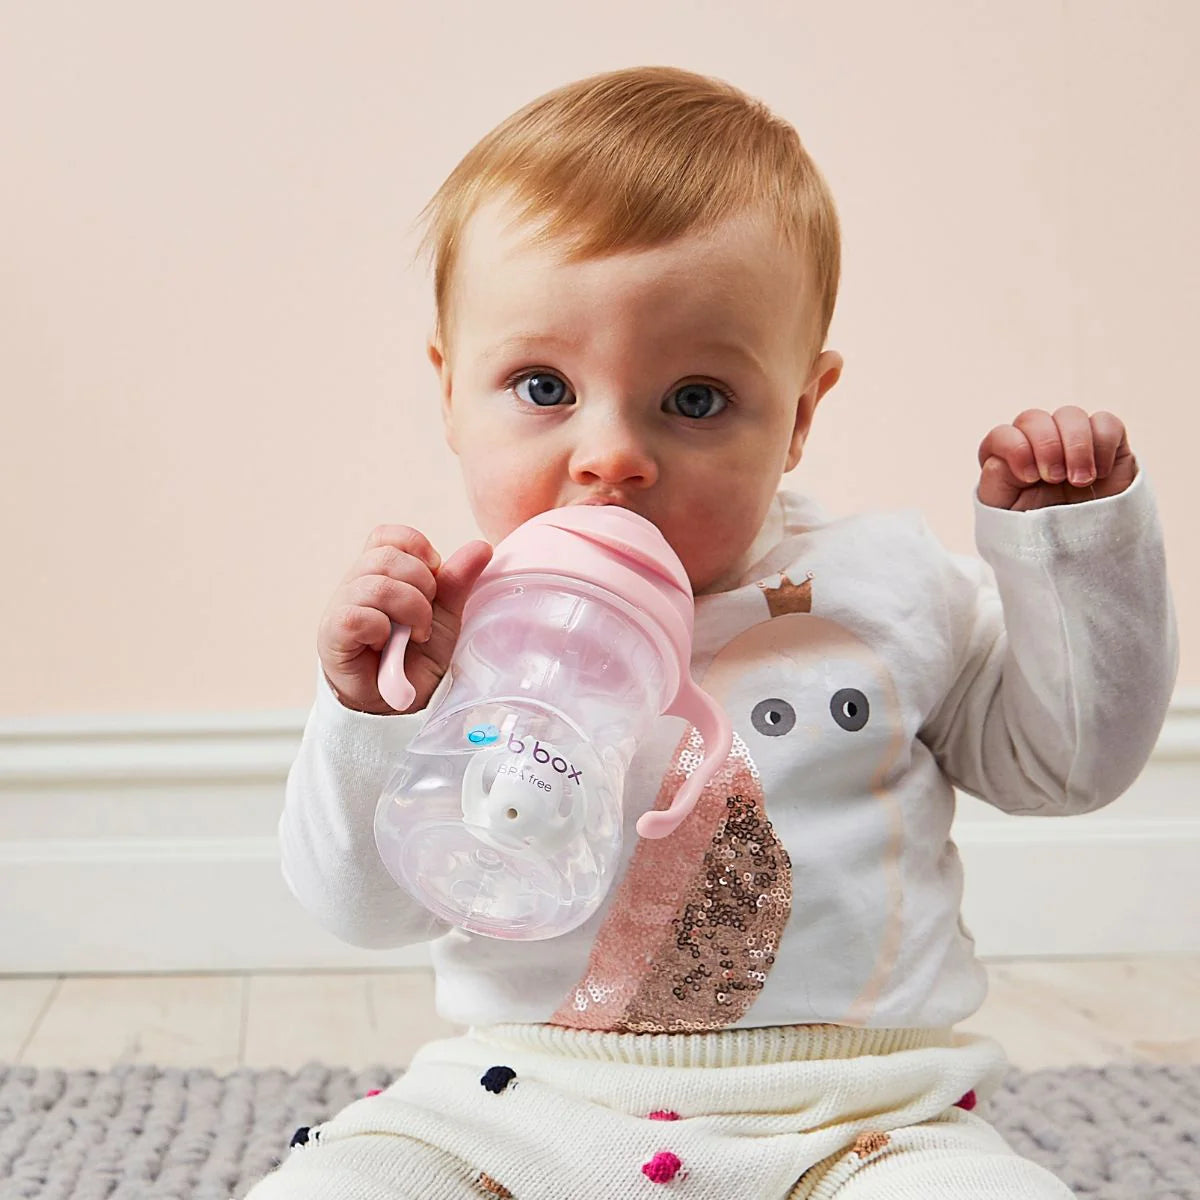 Sippy Cup (Pink Pomegranate)